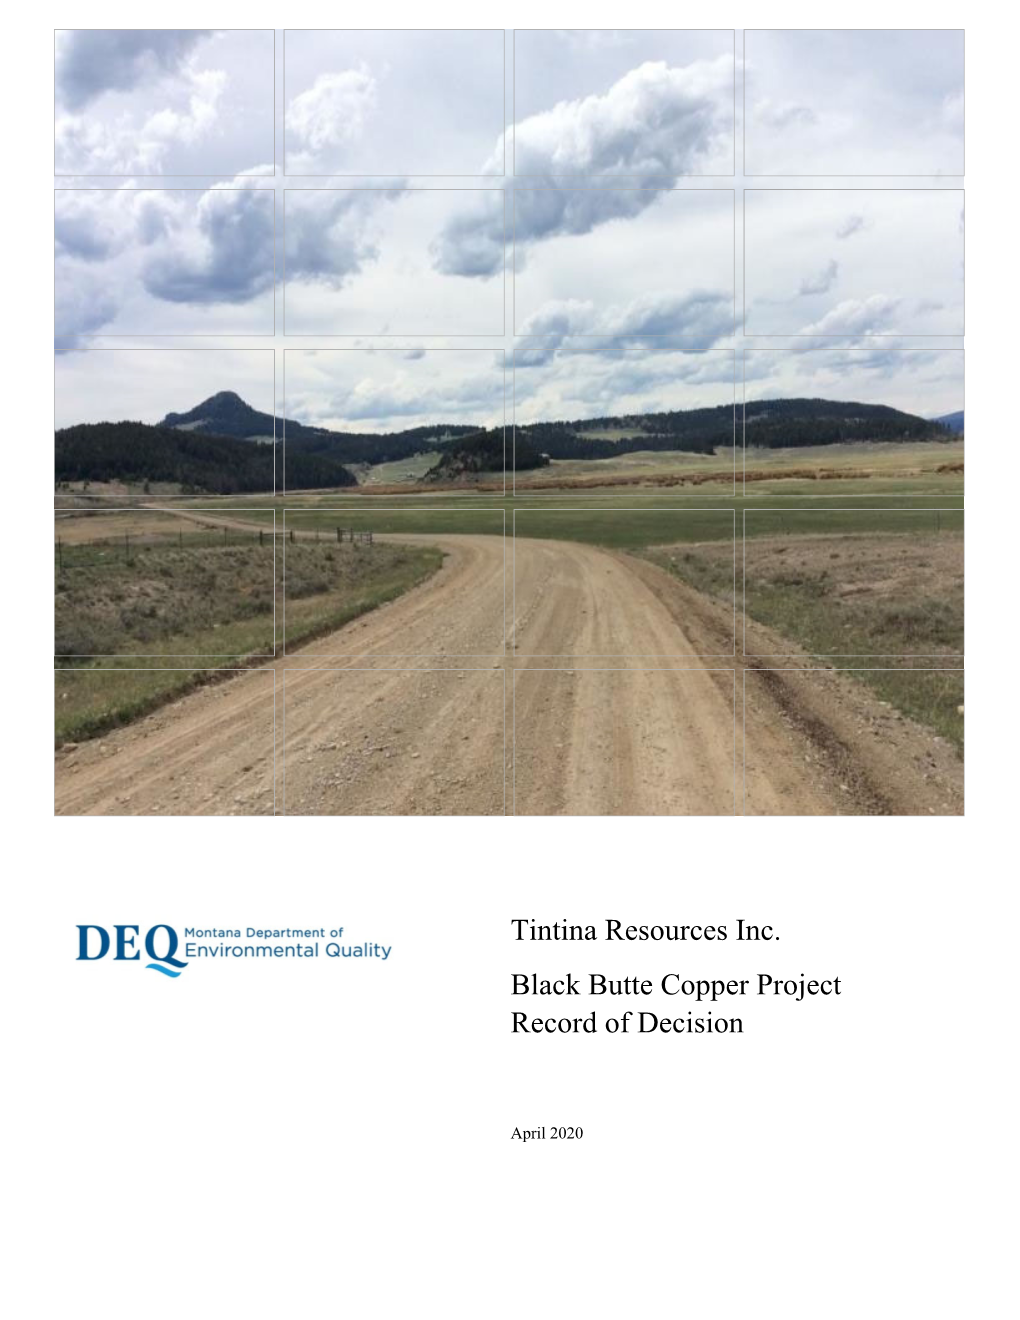 Tintina Resources Inc. Black Butte Copper Project Record of Decision